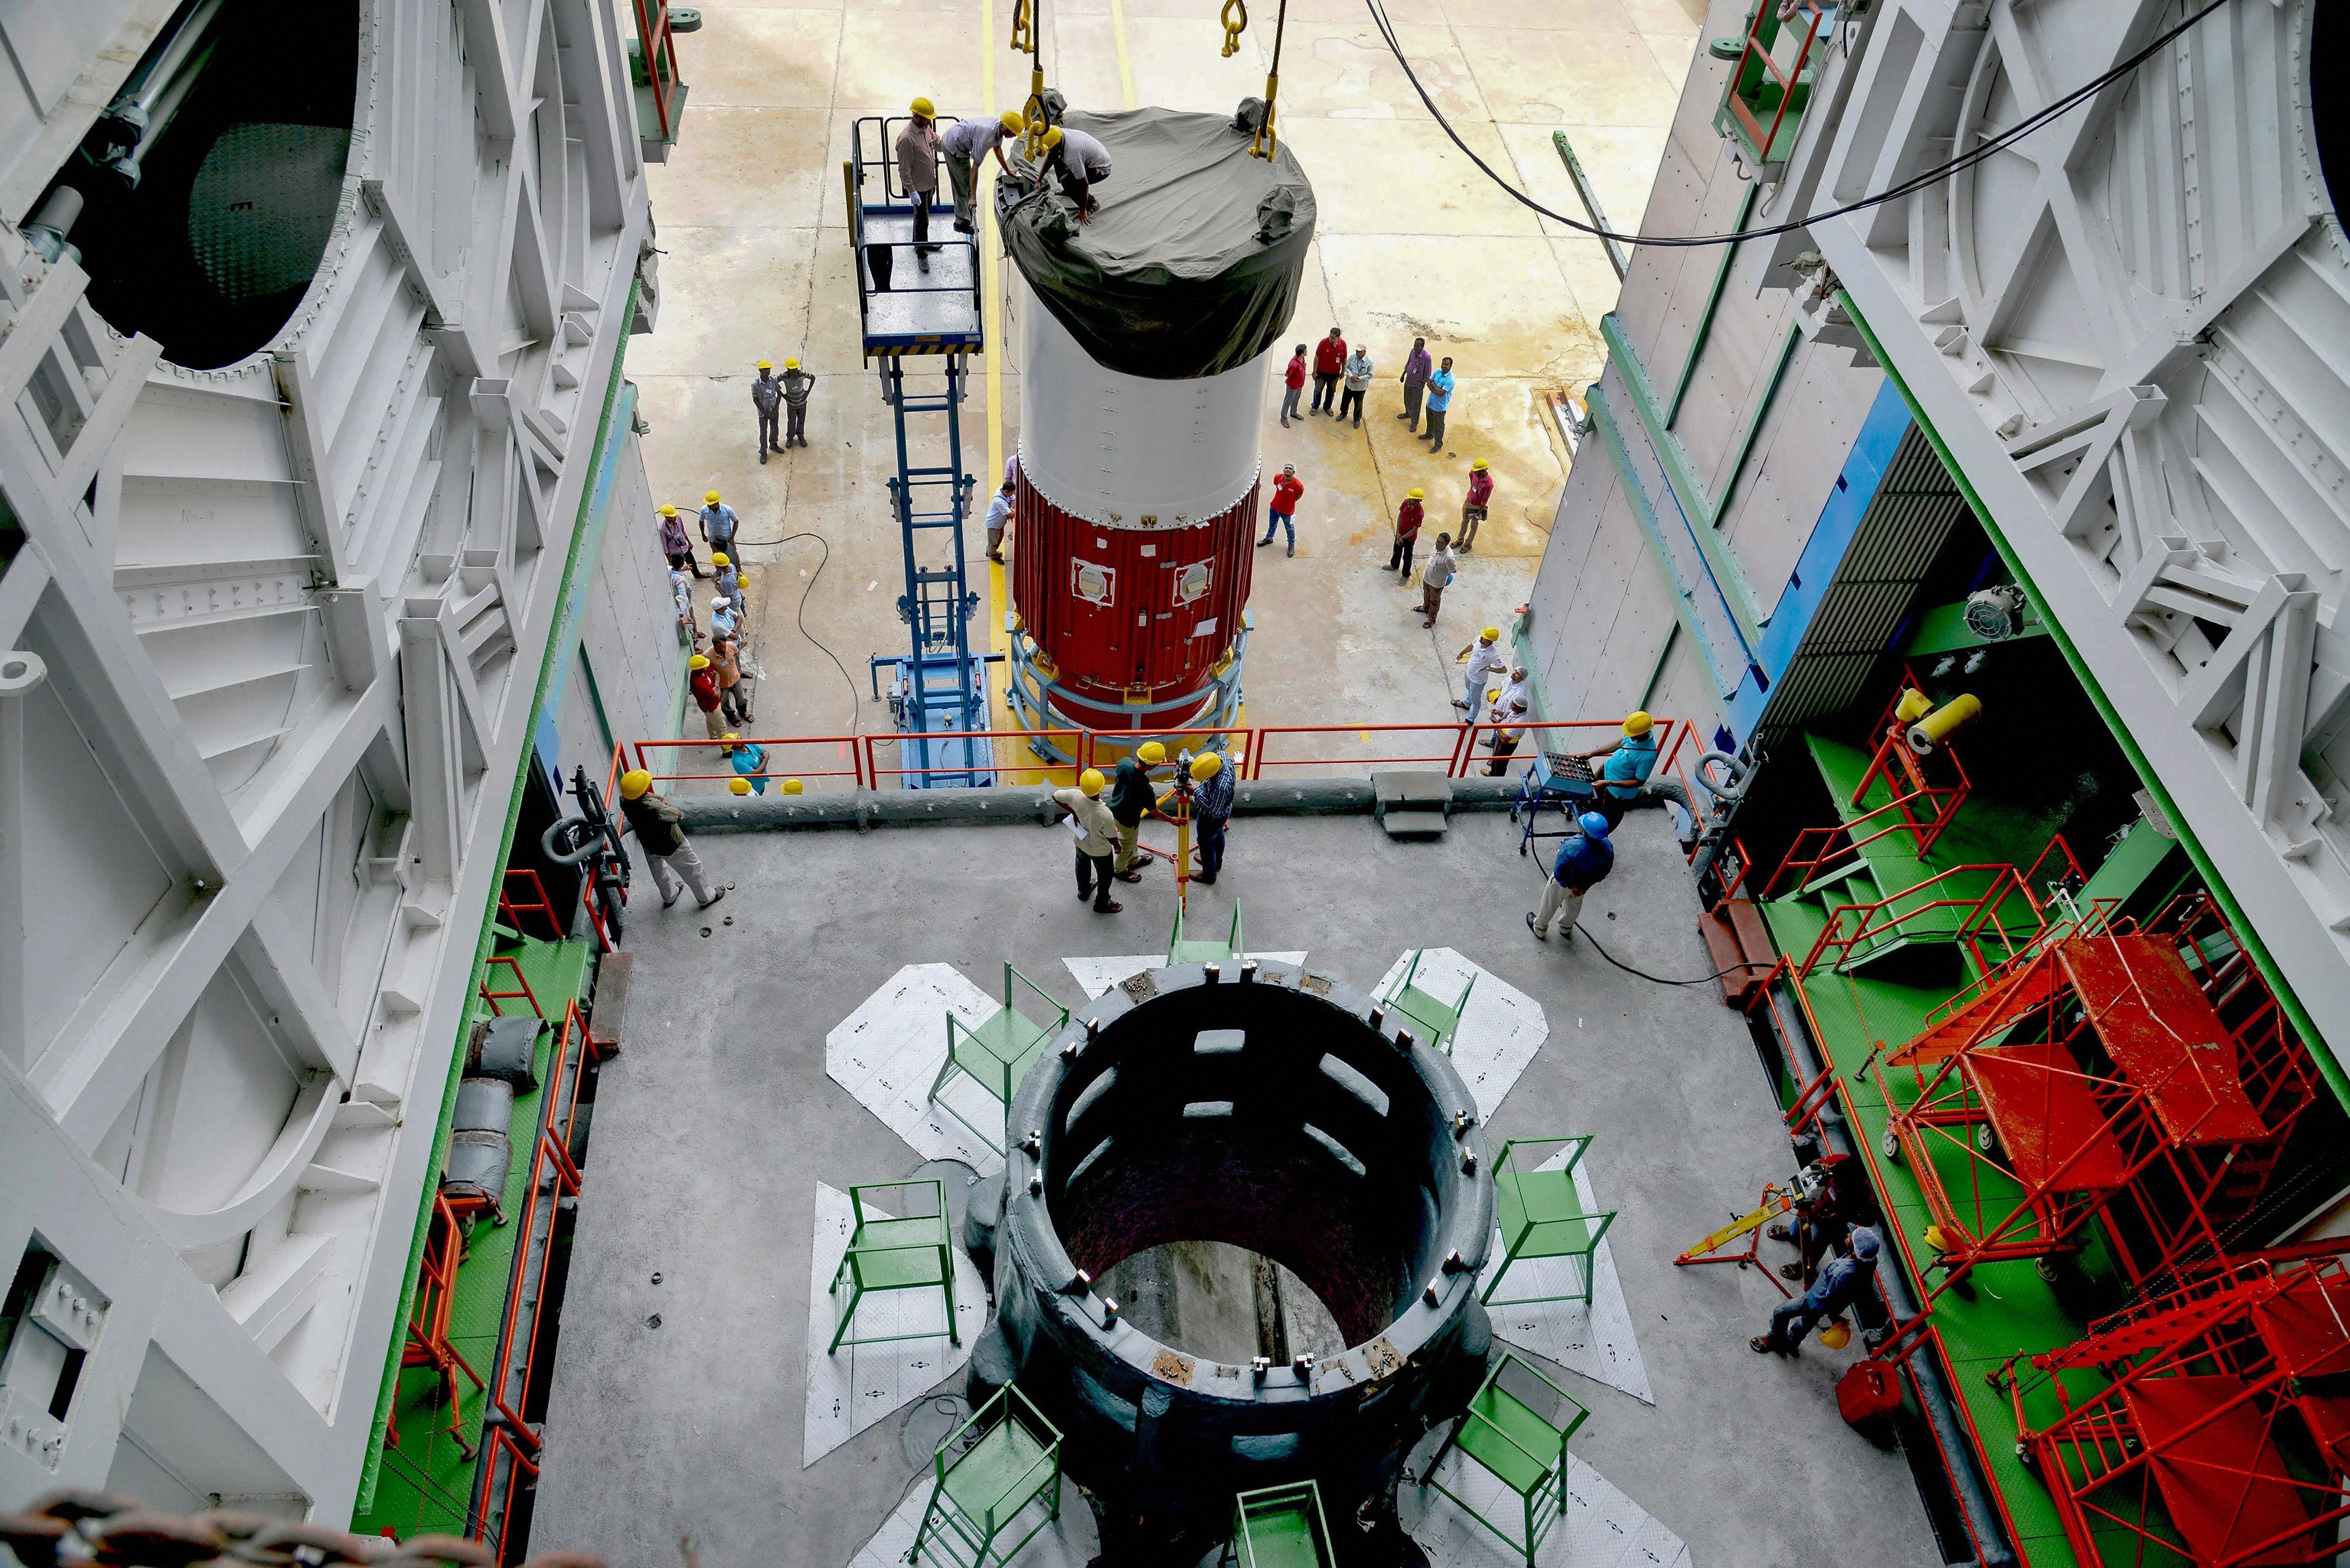 Nozzle end segment of PSLV-C42 first stage is placed over the launch pedestal as preparations are underway for the first-ever commercial launch by ISRO, of two UK satellites Novasar and S1-4, from the spaceport of Sriharikota near Chennai. PTI